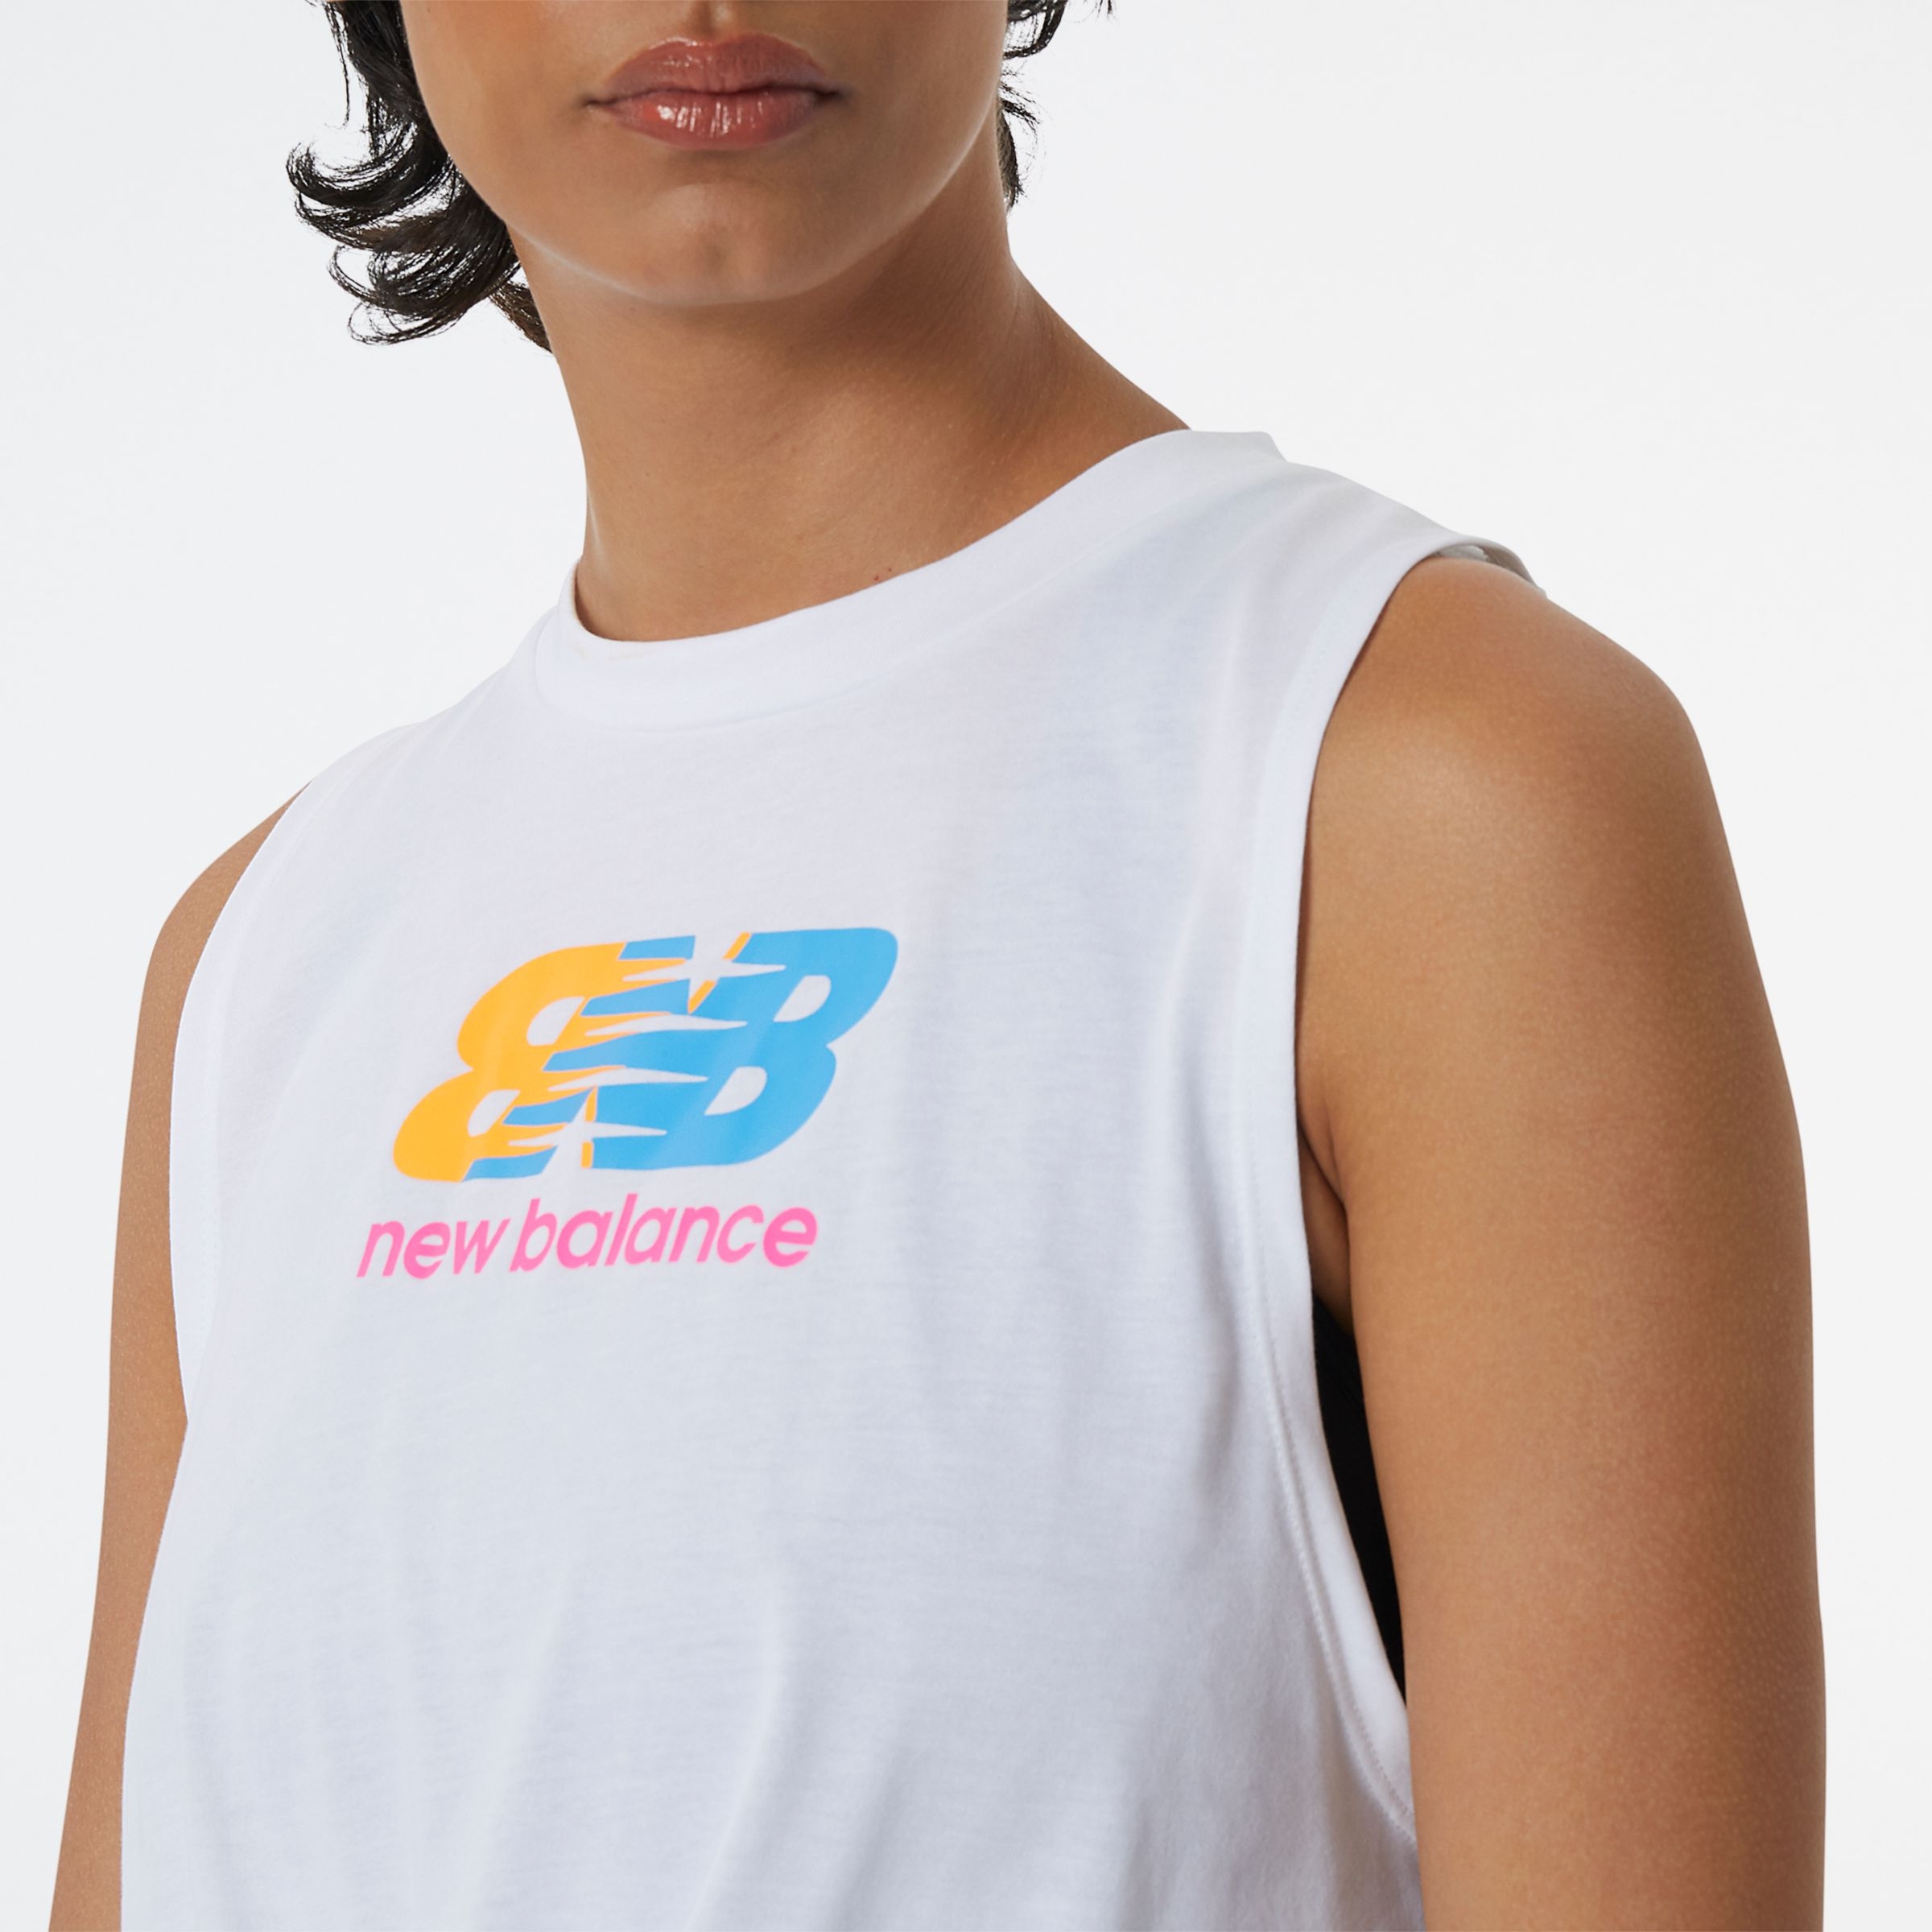 New Balance Musculosa Relentless Graphic Tank WT21171, , large